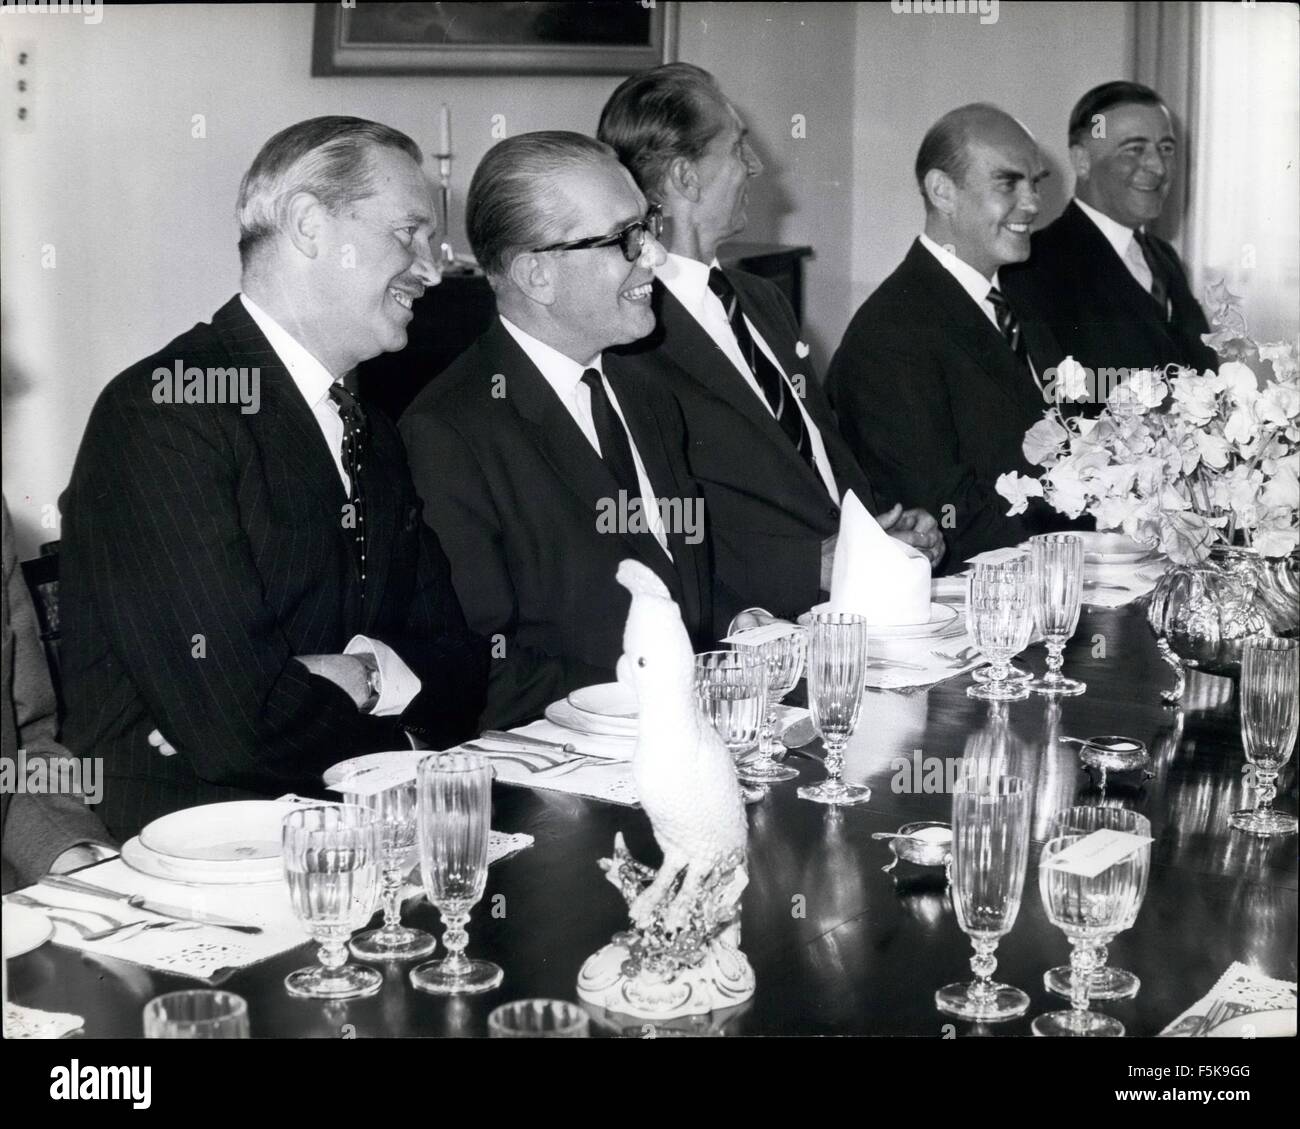 1968 - West German defence minister on visit to London : Herr Von Hassel the west German minister foe defense - now on a visit to lonodn - this afternoon entrained his counterpart - Mr.Peter tourney croft to lunch at the German embassy. photo shows At the luncheon this afternoon General Sir Richard Hull ( Chief of the Imperial general staff) Herr Von Hassel Viscount Hood Captain S. Treesch and vice admiral Hopkins. © Keystone Pictures USA/ZUMAPRESS.com/Alamy Live News Stock Photo